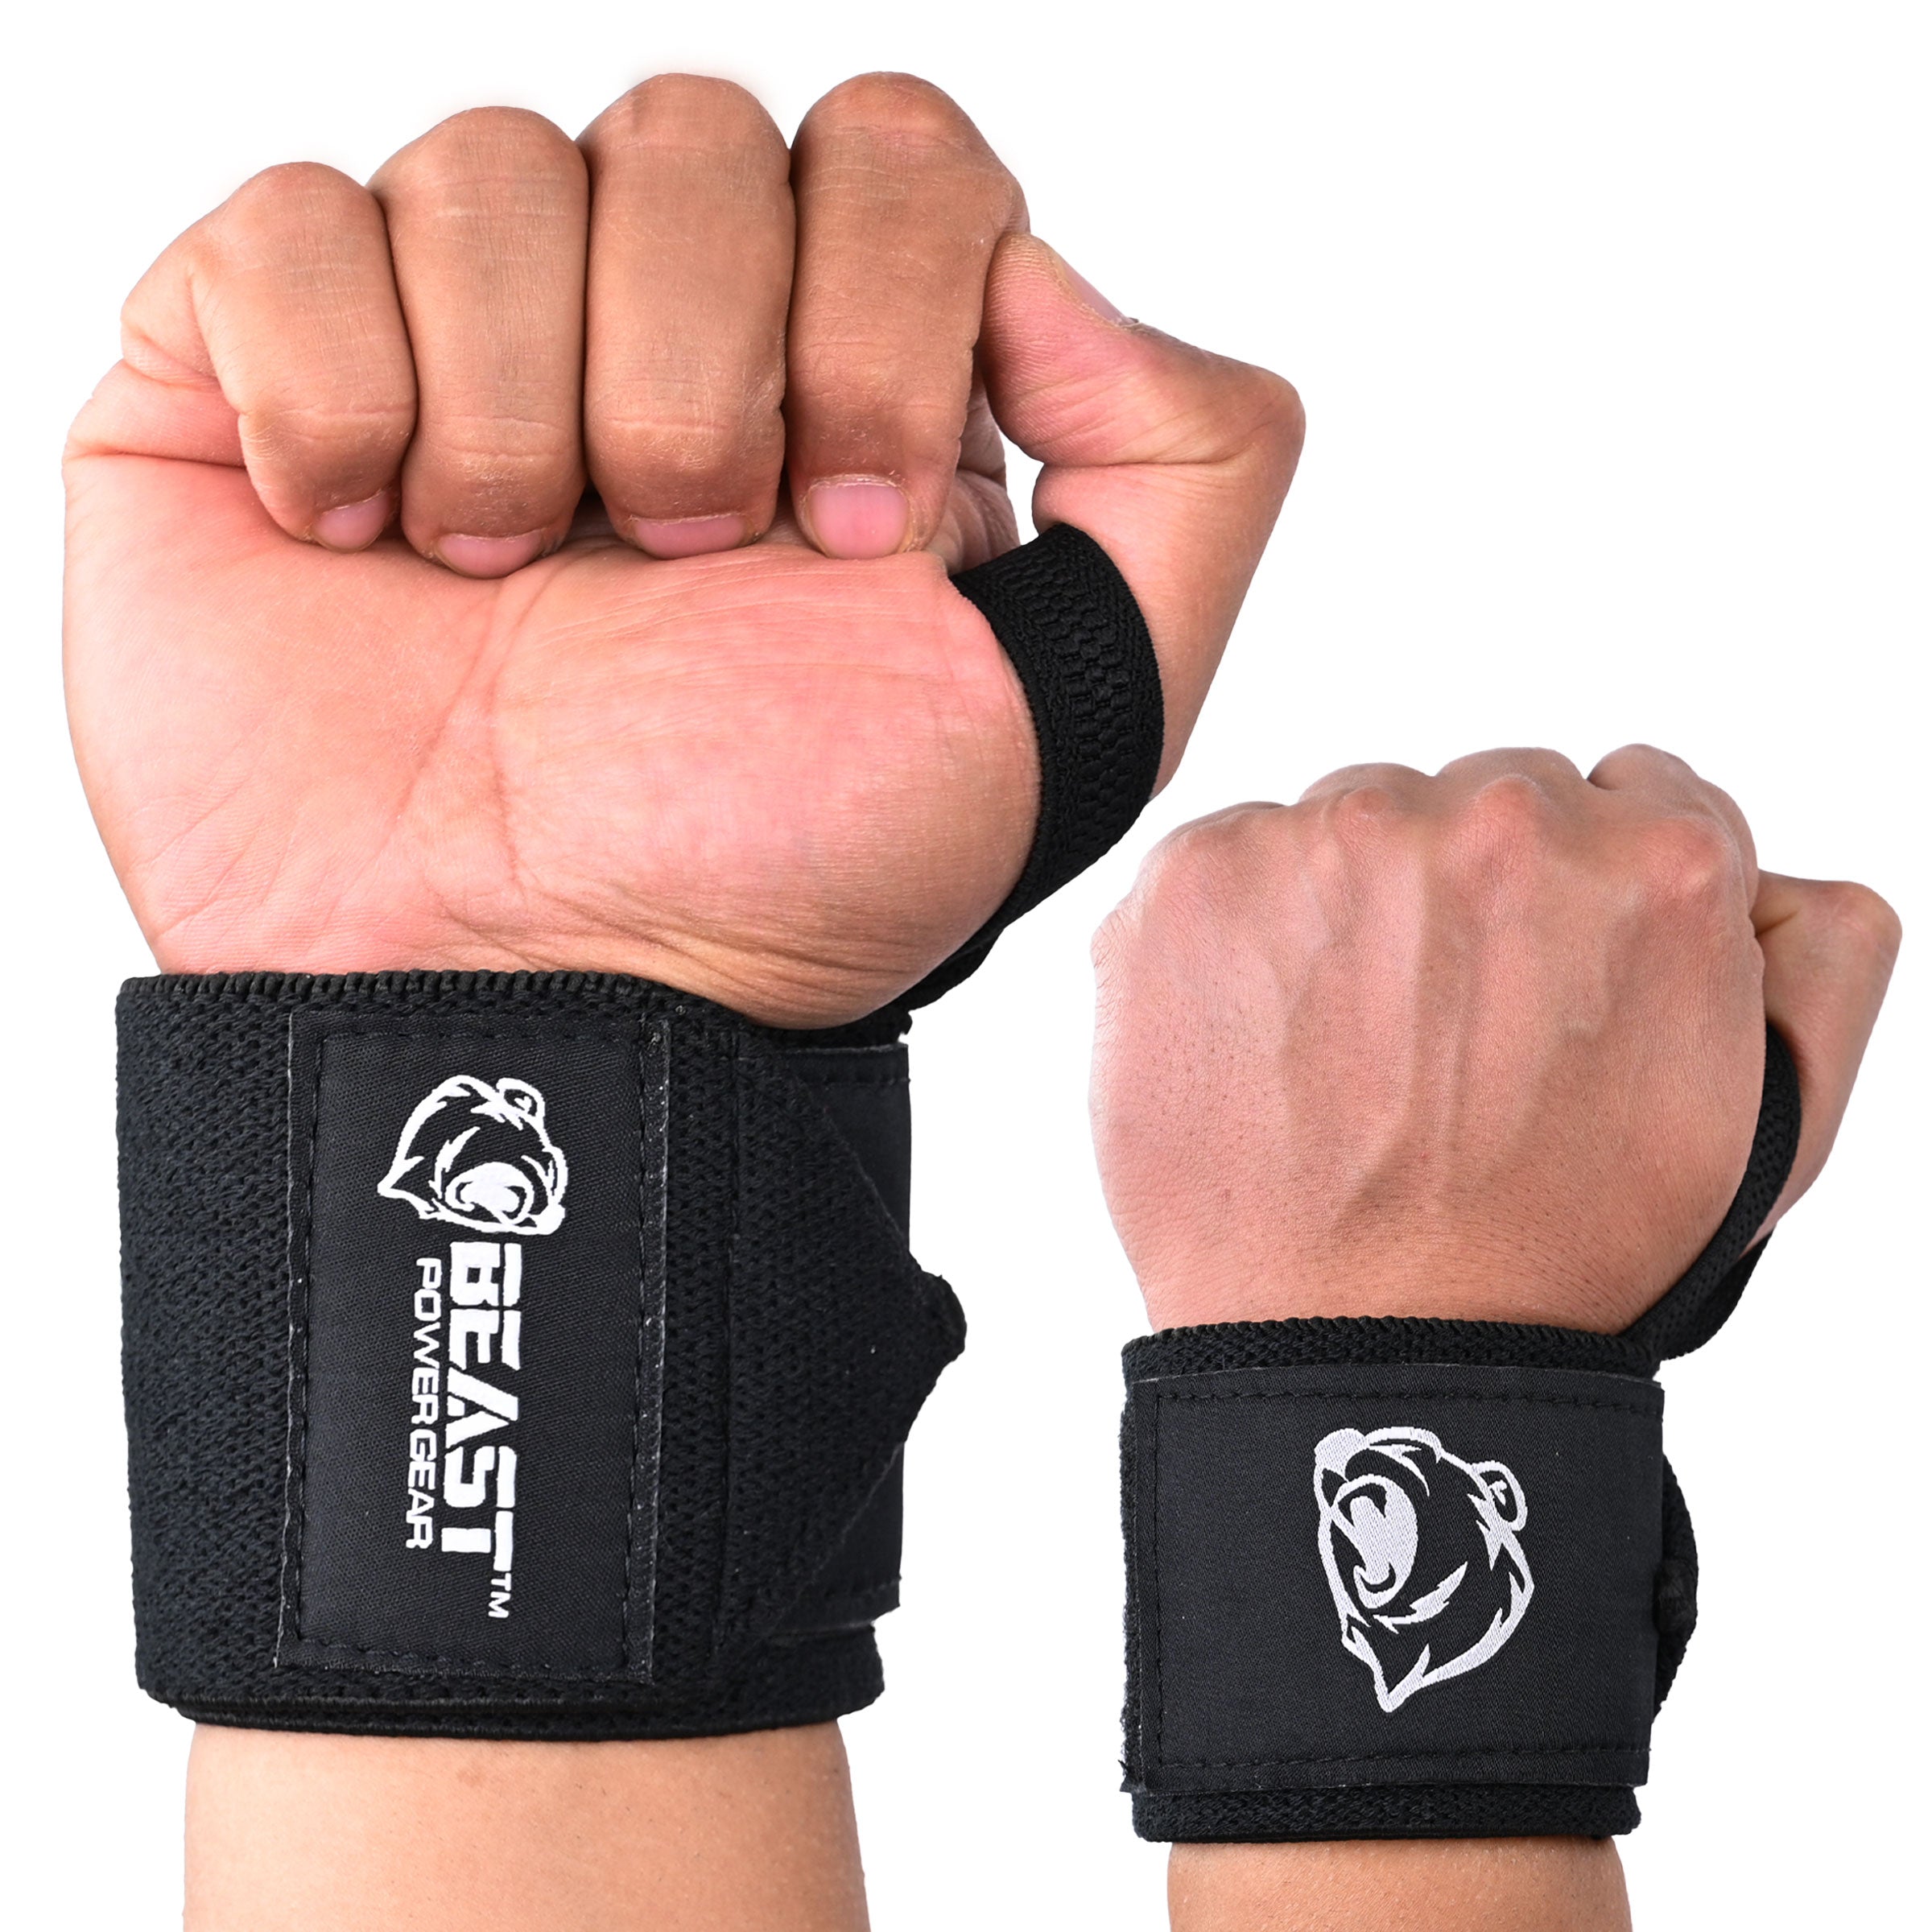 Beast Gear Wrist Wraps for Weightlifting - 20 Wrist Support Straps for  Weight Lifting with Thumb Loop